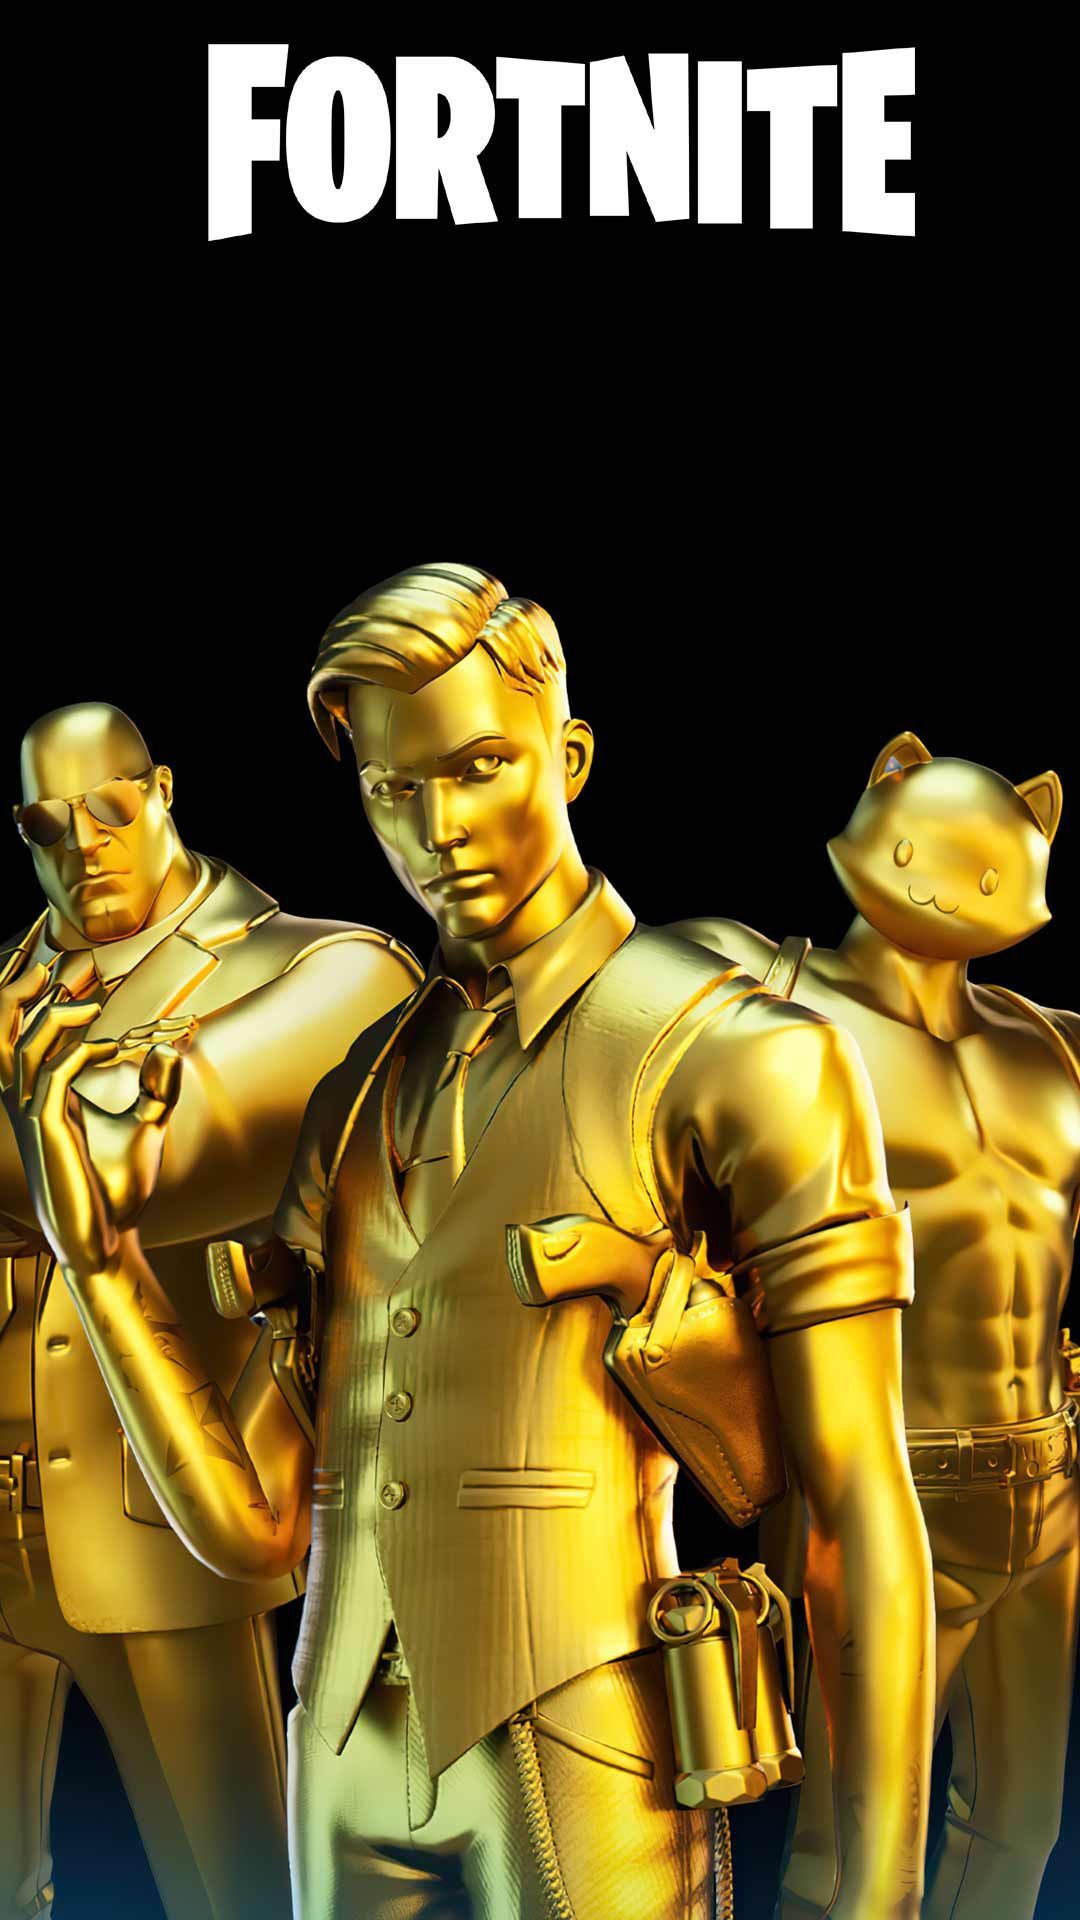 Midas Gold Fortnite skin phone wallpaper download HD background for iPhone android lock screen. Android phone wallpaper, Phone wallpaper, Skin image